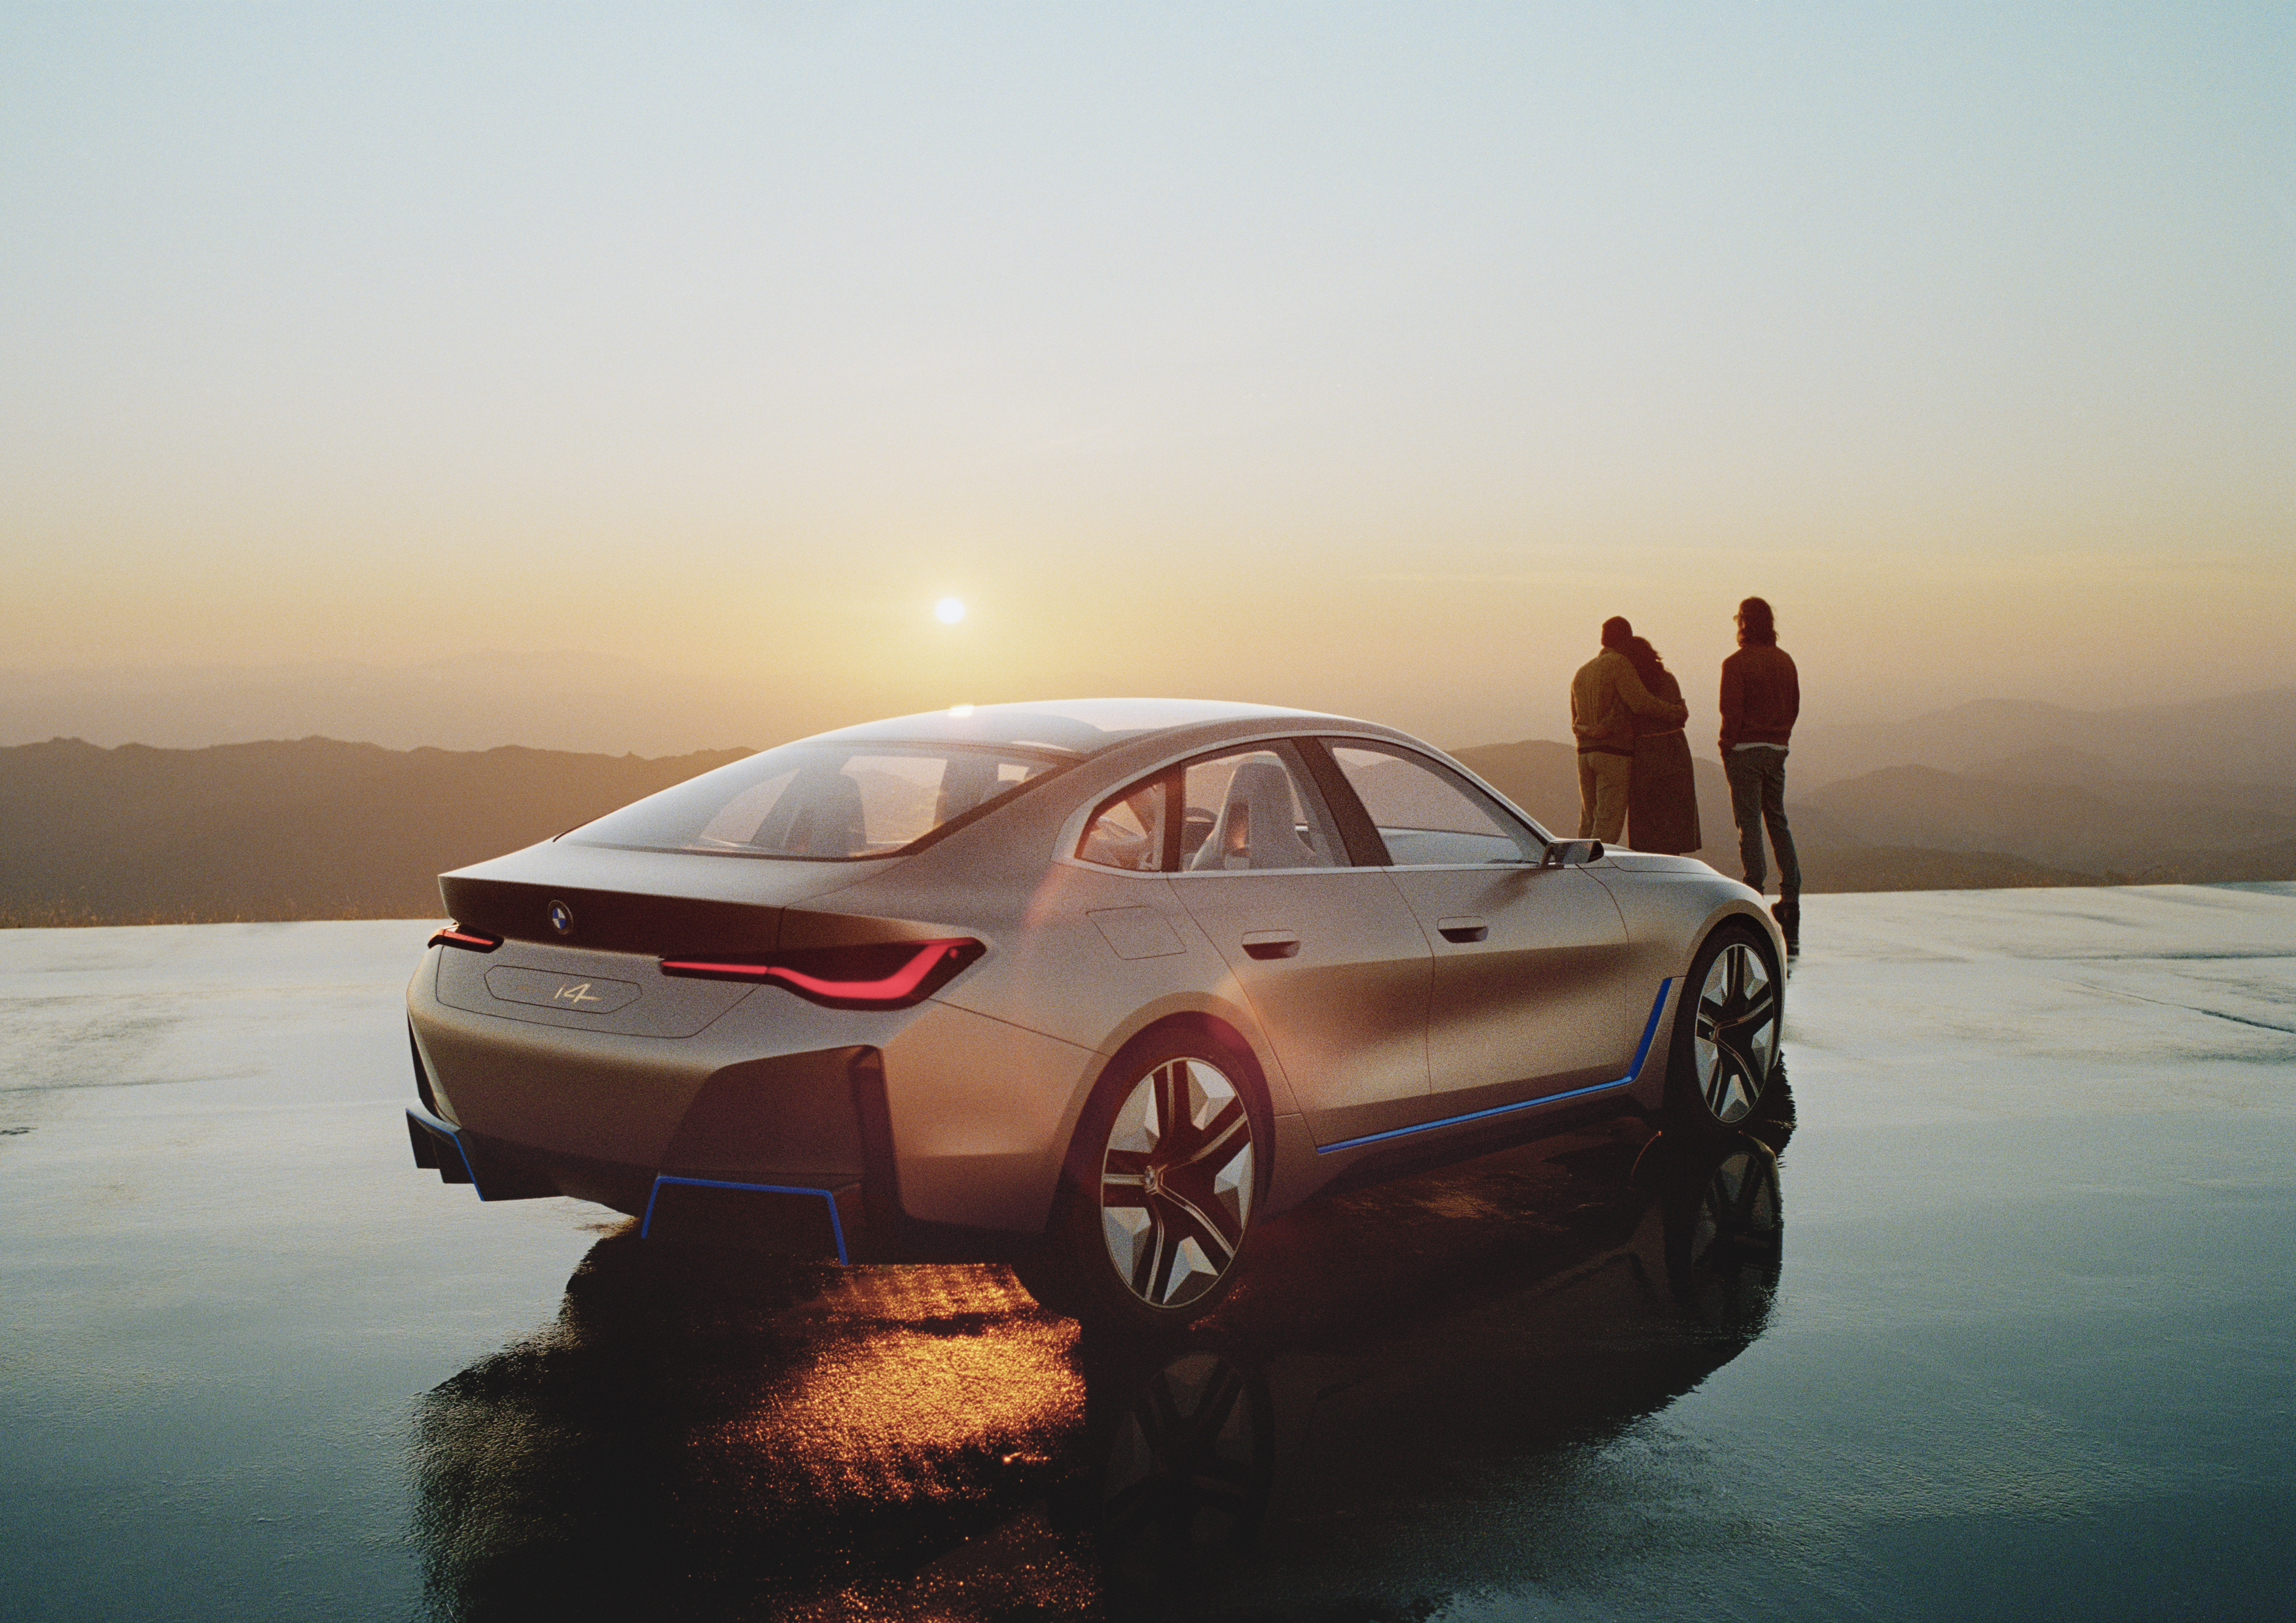 BMW Concept i4 shows first glimpse at production EV saloon